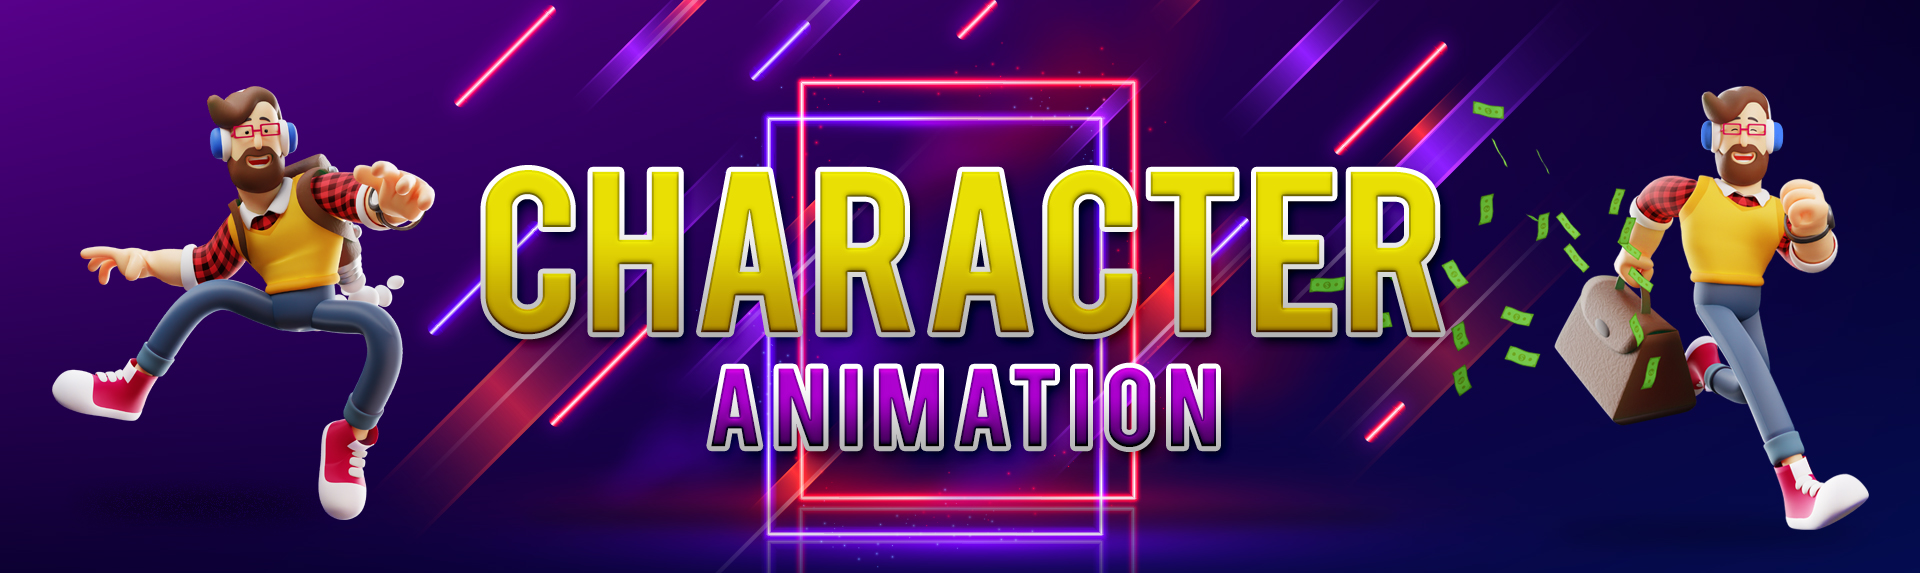 2D & 3D Character Animation Services In Houston | Wizard Animations